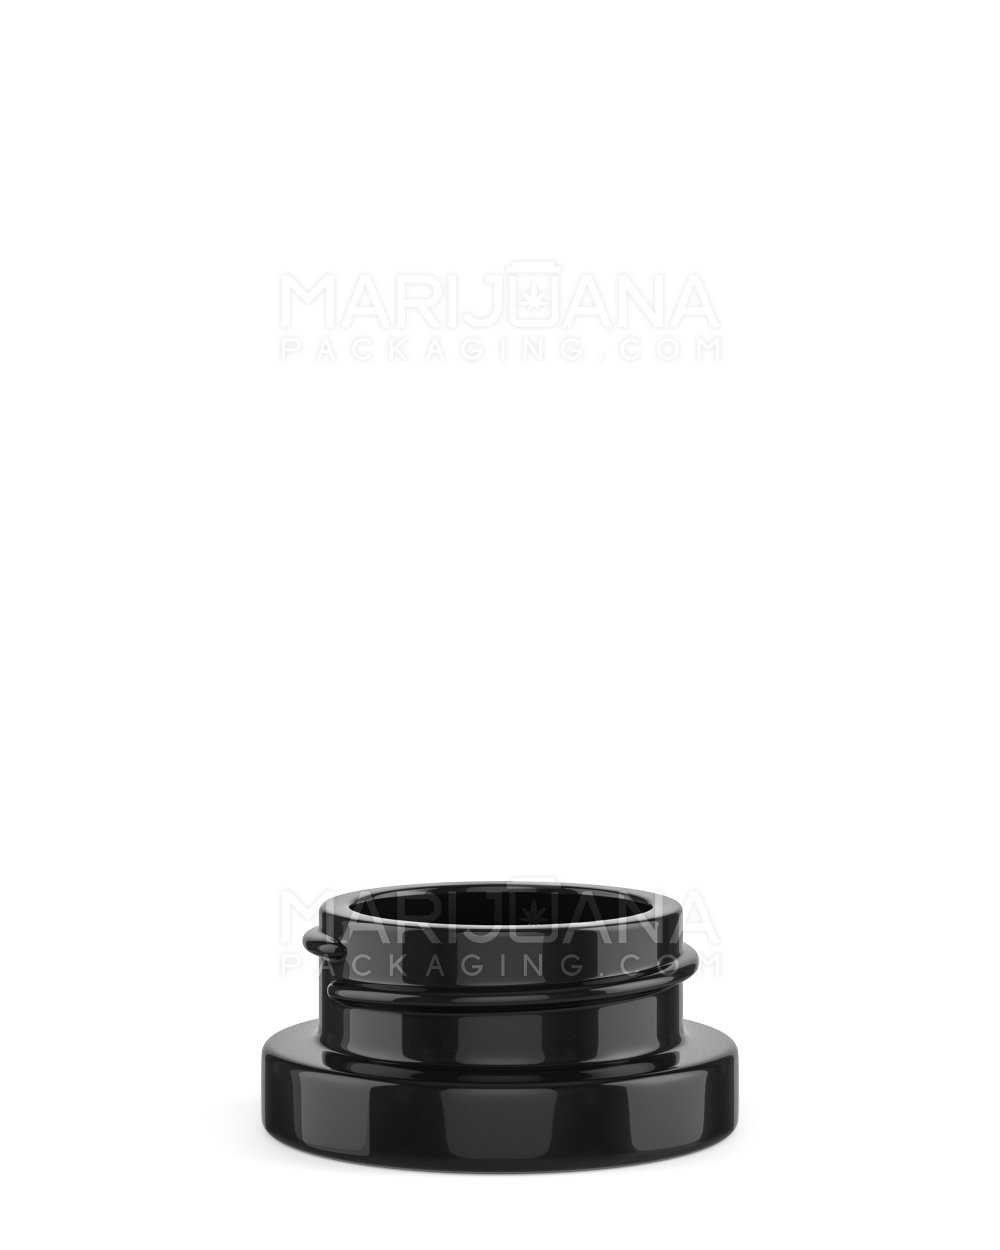 Glossy Black Glass Concentrate Containers | 38mm - 9mL | Sample - 1